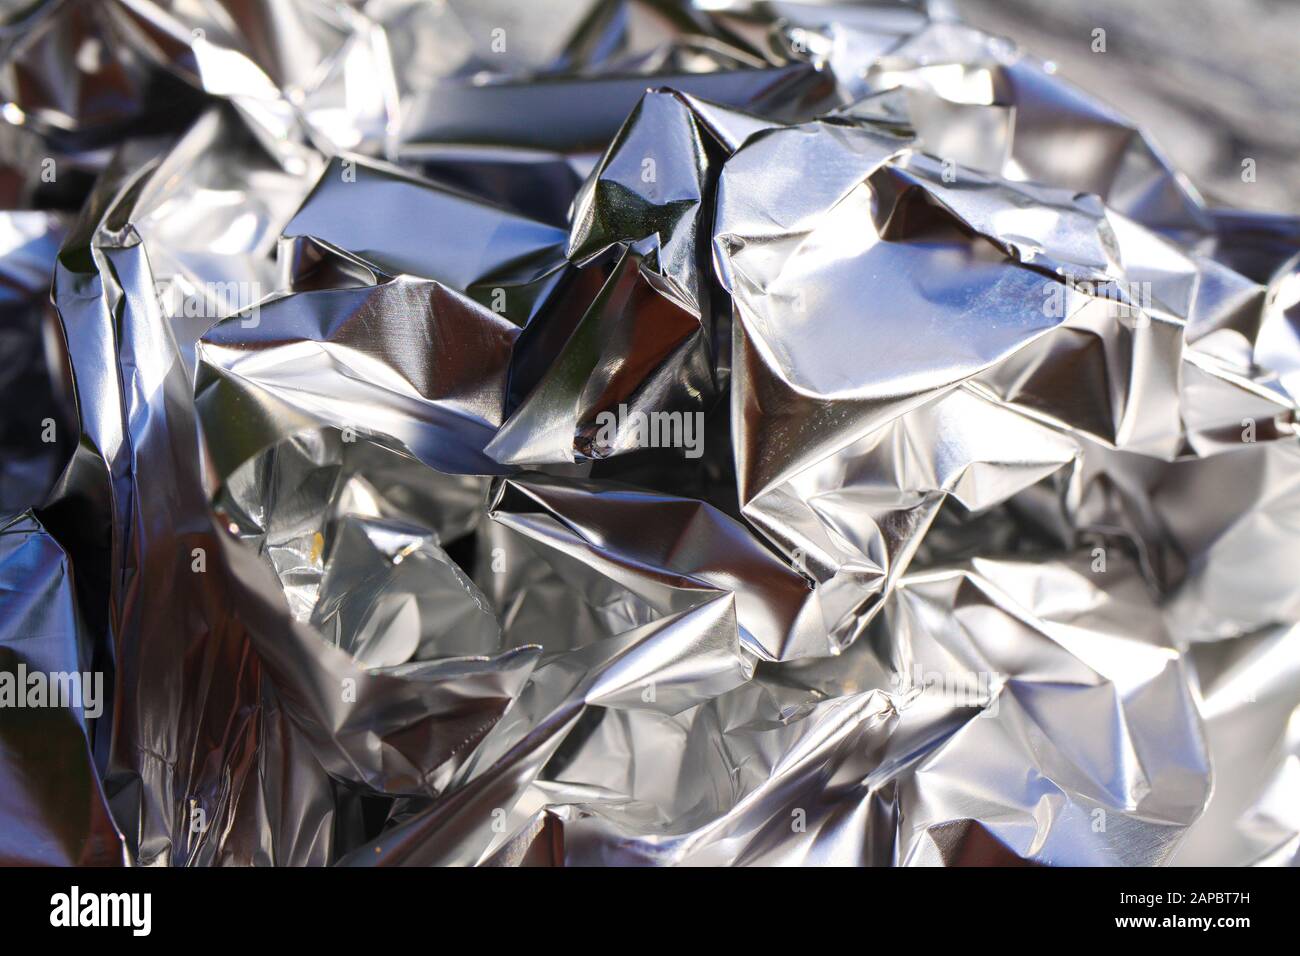 Full Frame Take Of A Sheet Of Crumpled Silver Aluminum Foil Stock Photo -  Download Image Now - iStock